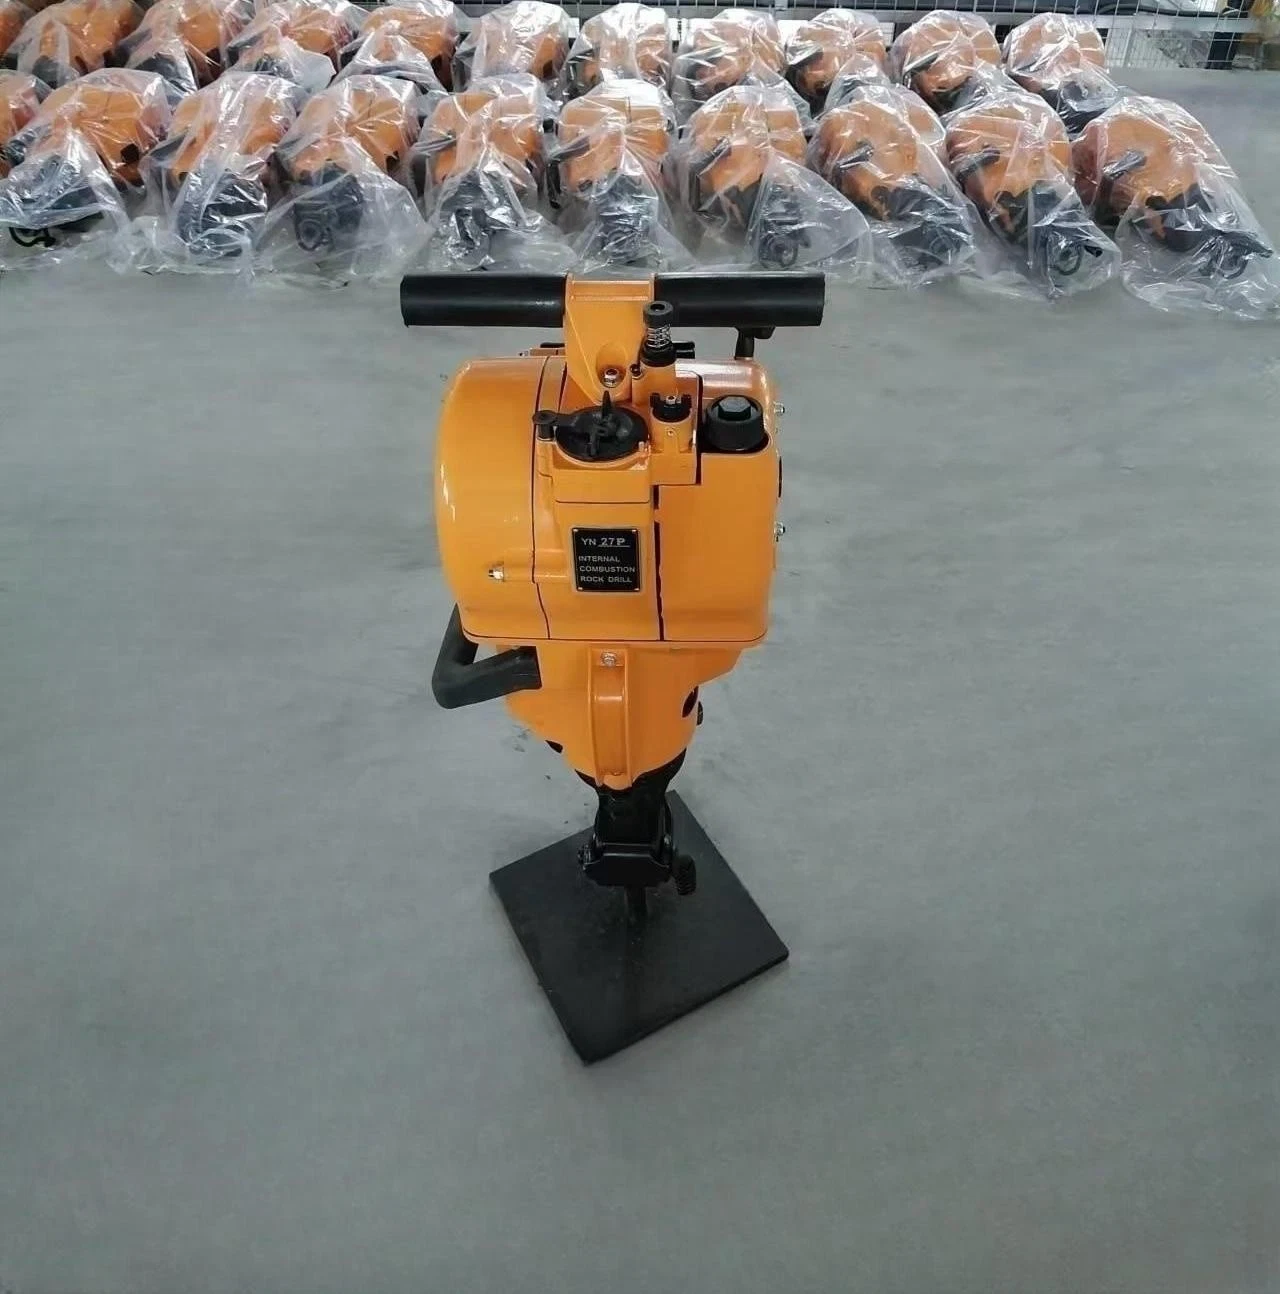 Yn27p Rock Drill Gasoline Widely Used and Suitable for Non-Electric Environment